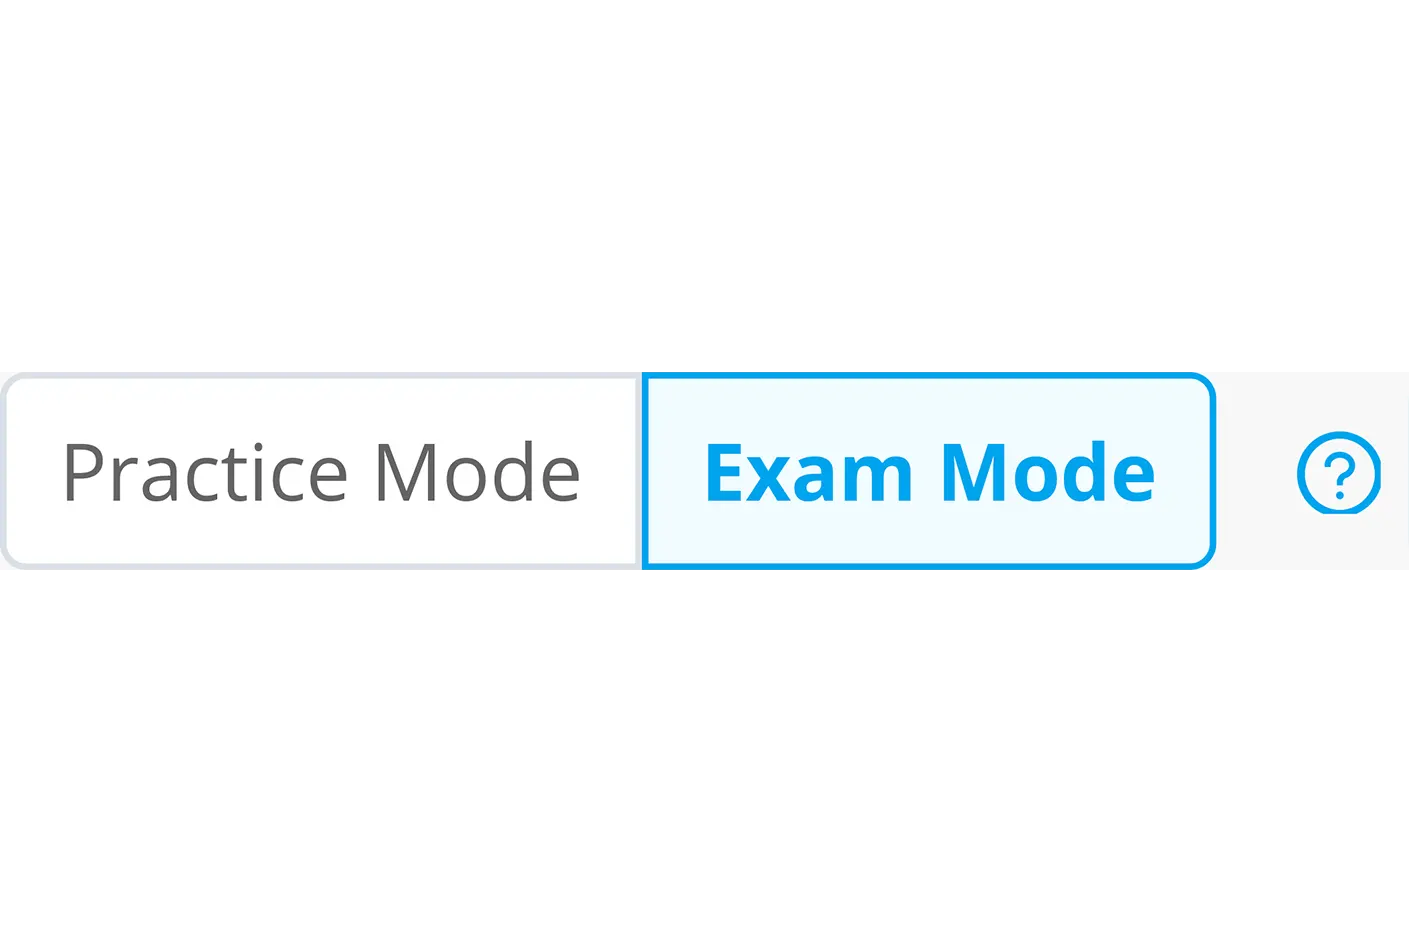 There is a screenshot of exam mode select for Language Test practice test